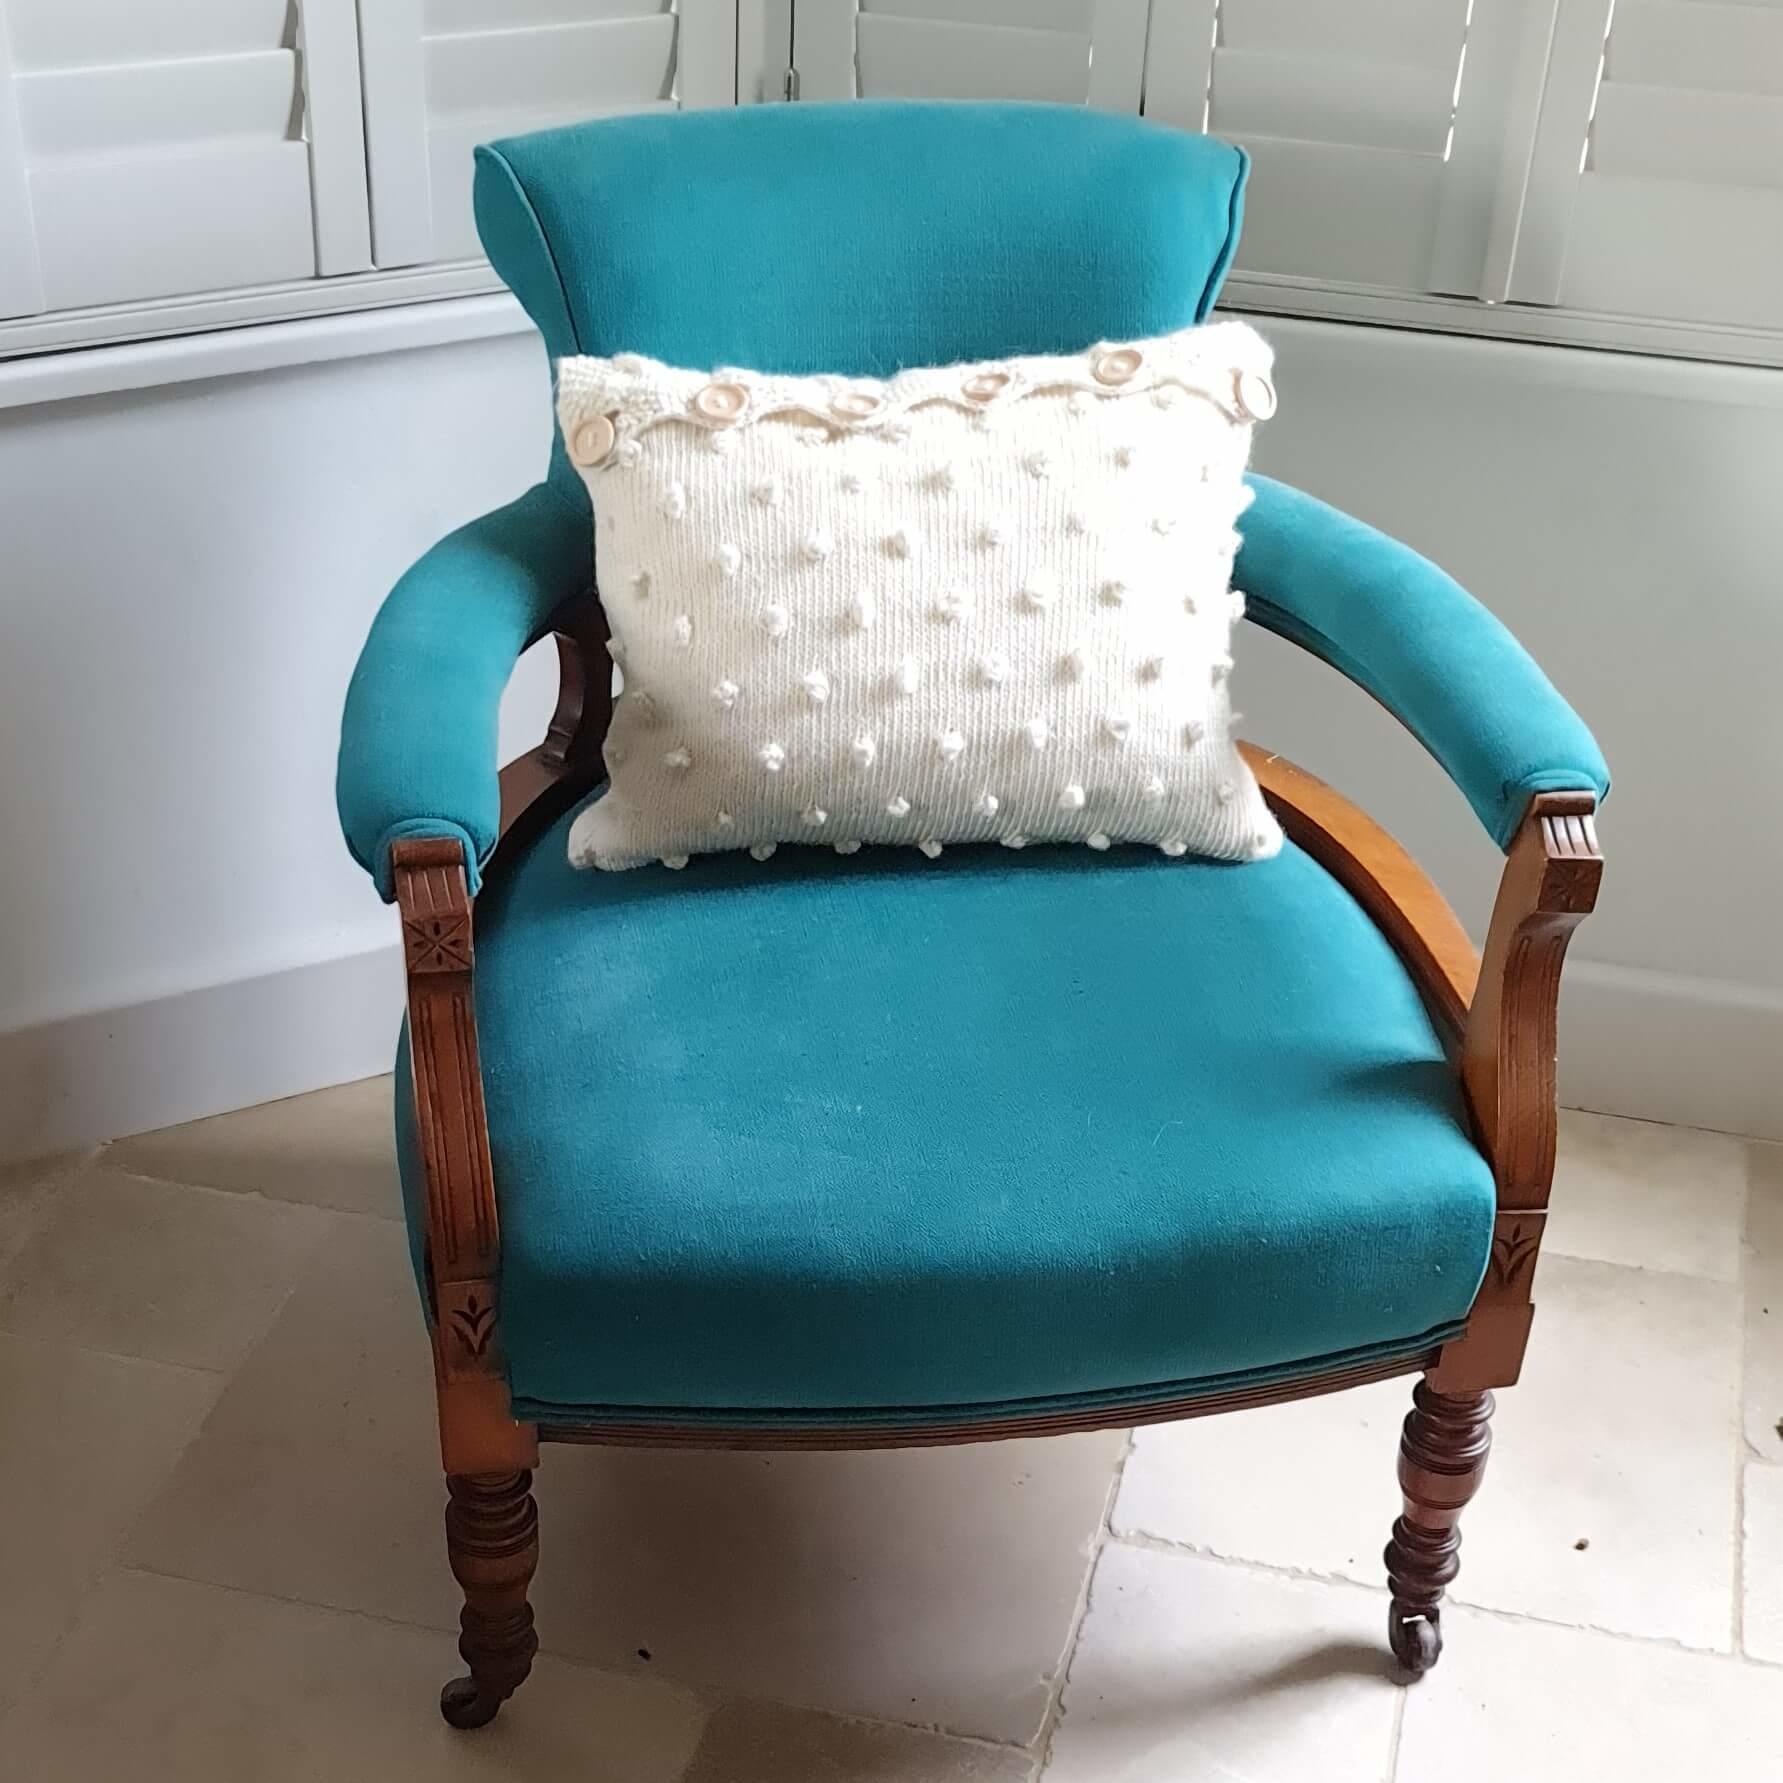 Image of cushion on chair